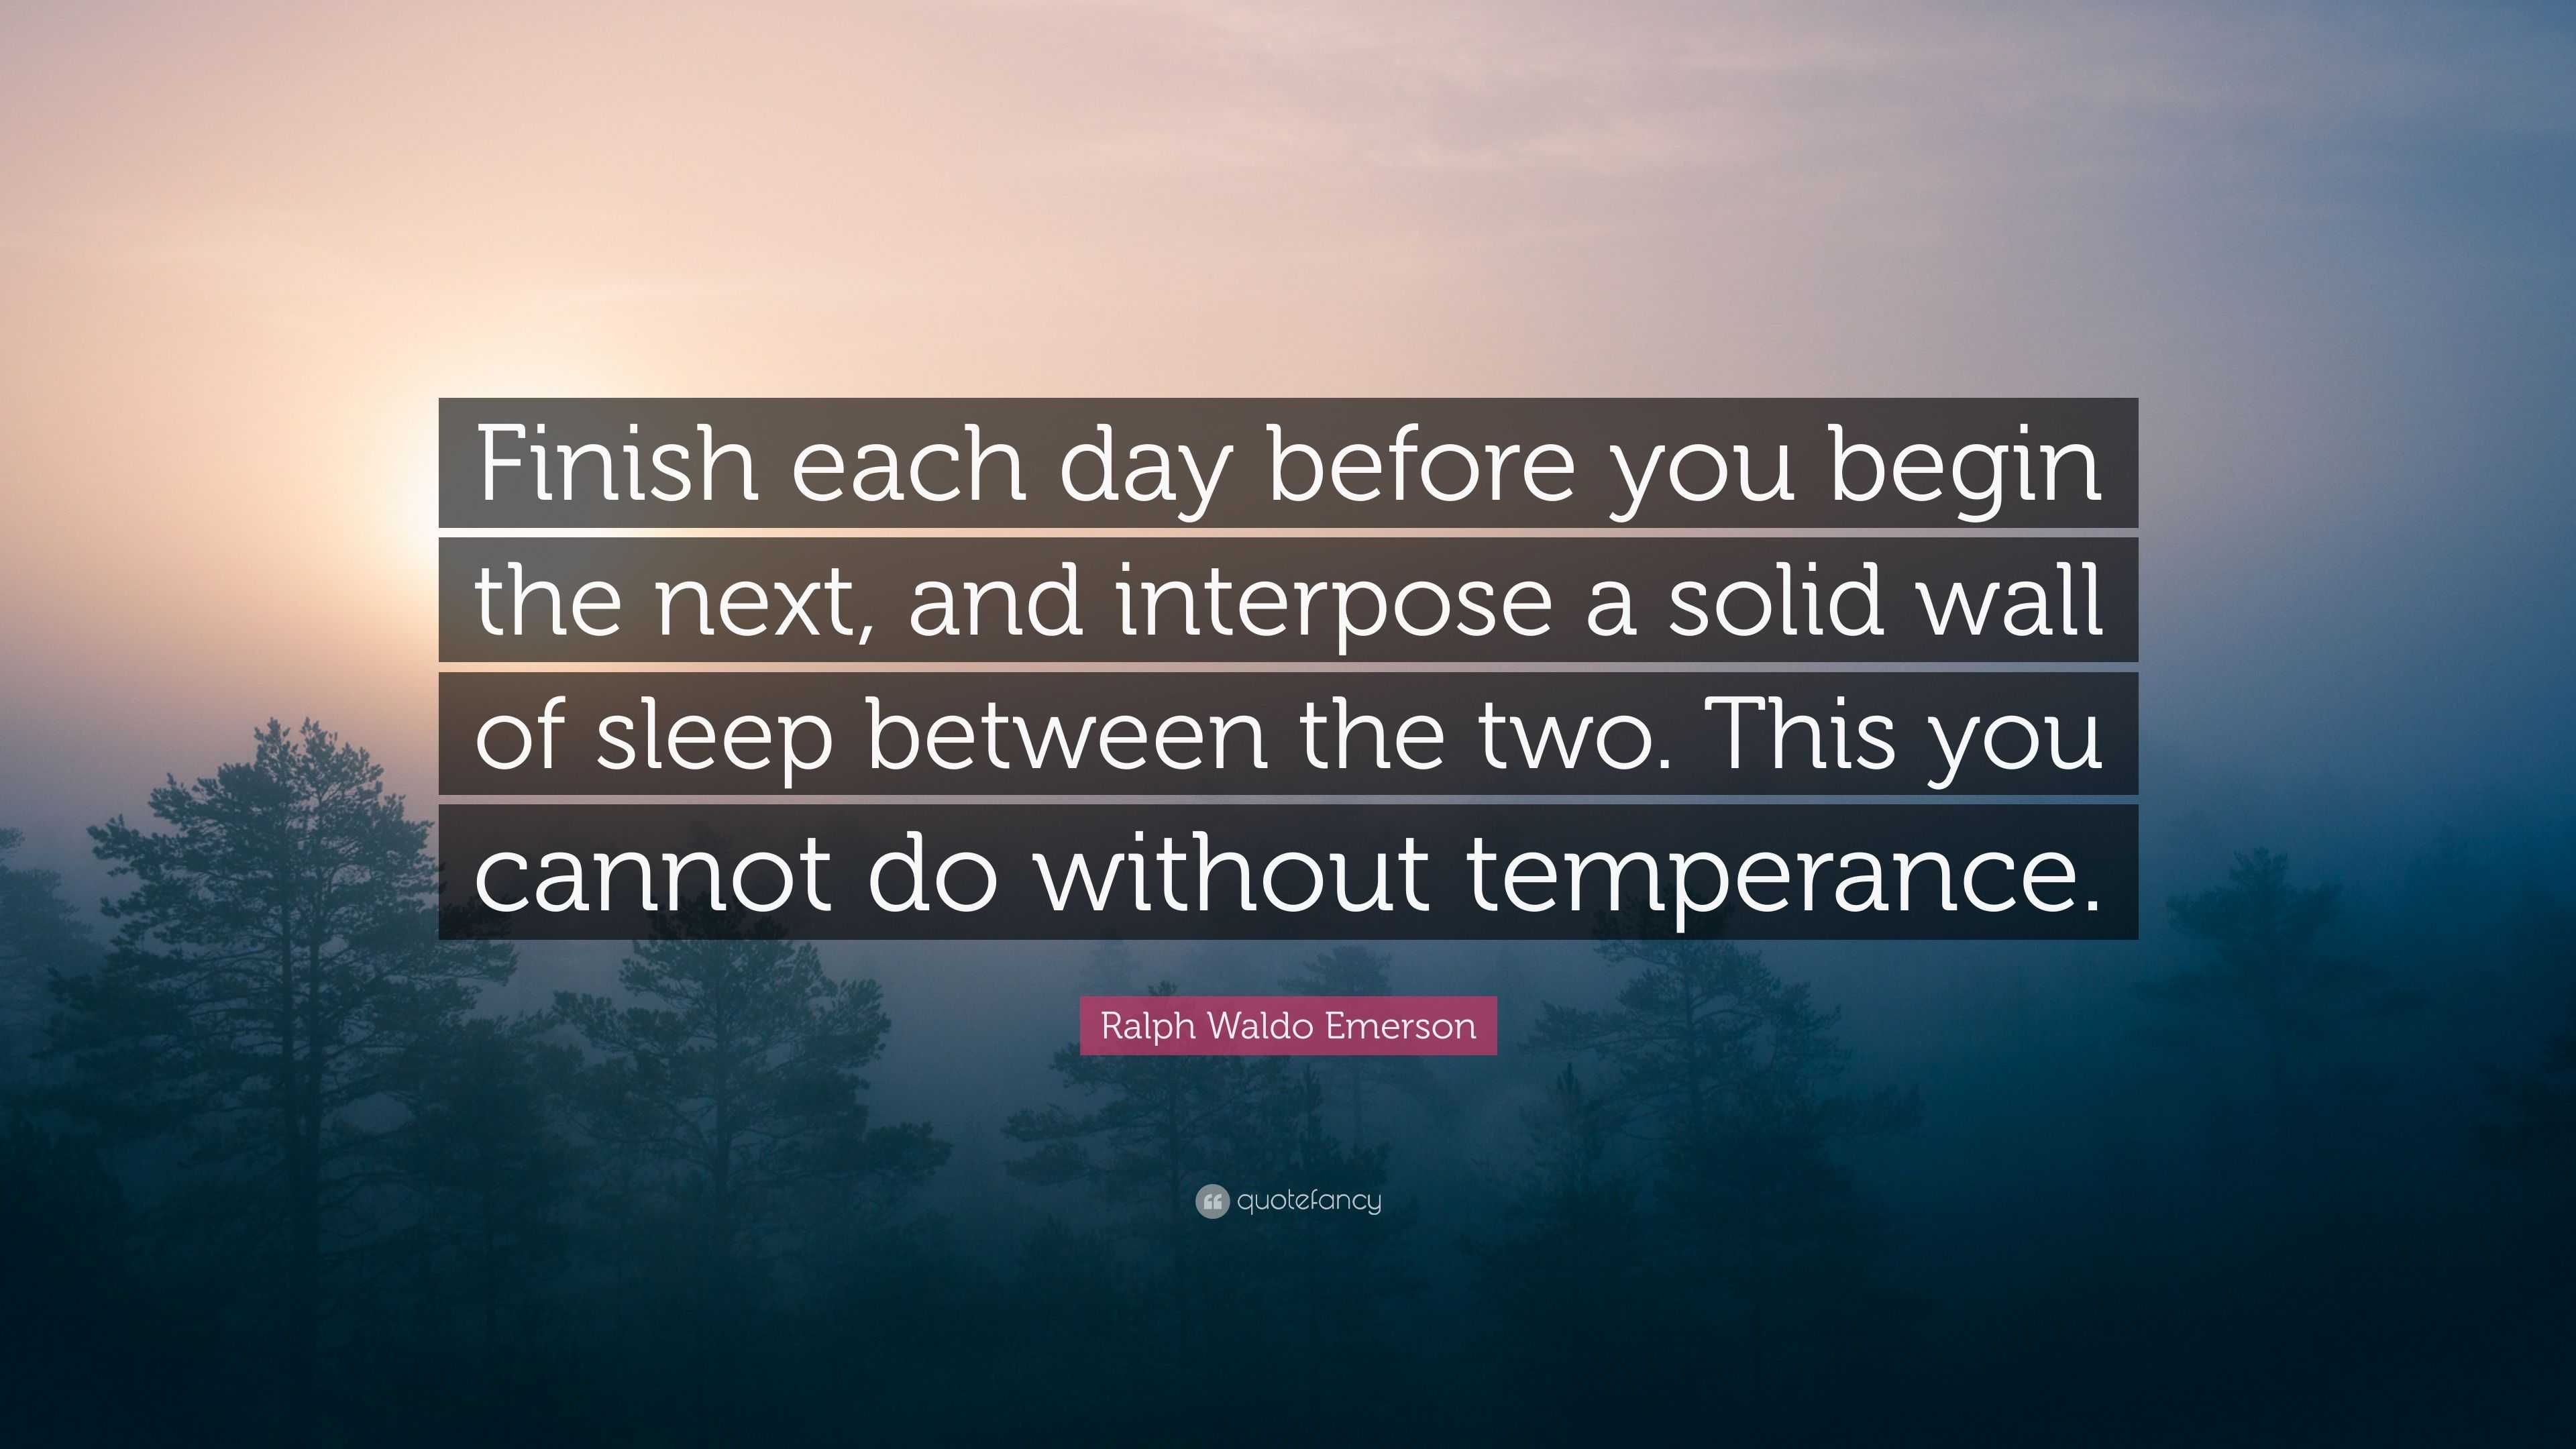 https://quotefancy.com/media/wallpaper/3840x2160/5167702-Ralph-Waldo-Emerson-Quote-Finish-each-day-before-you-begin-the.jpg